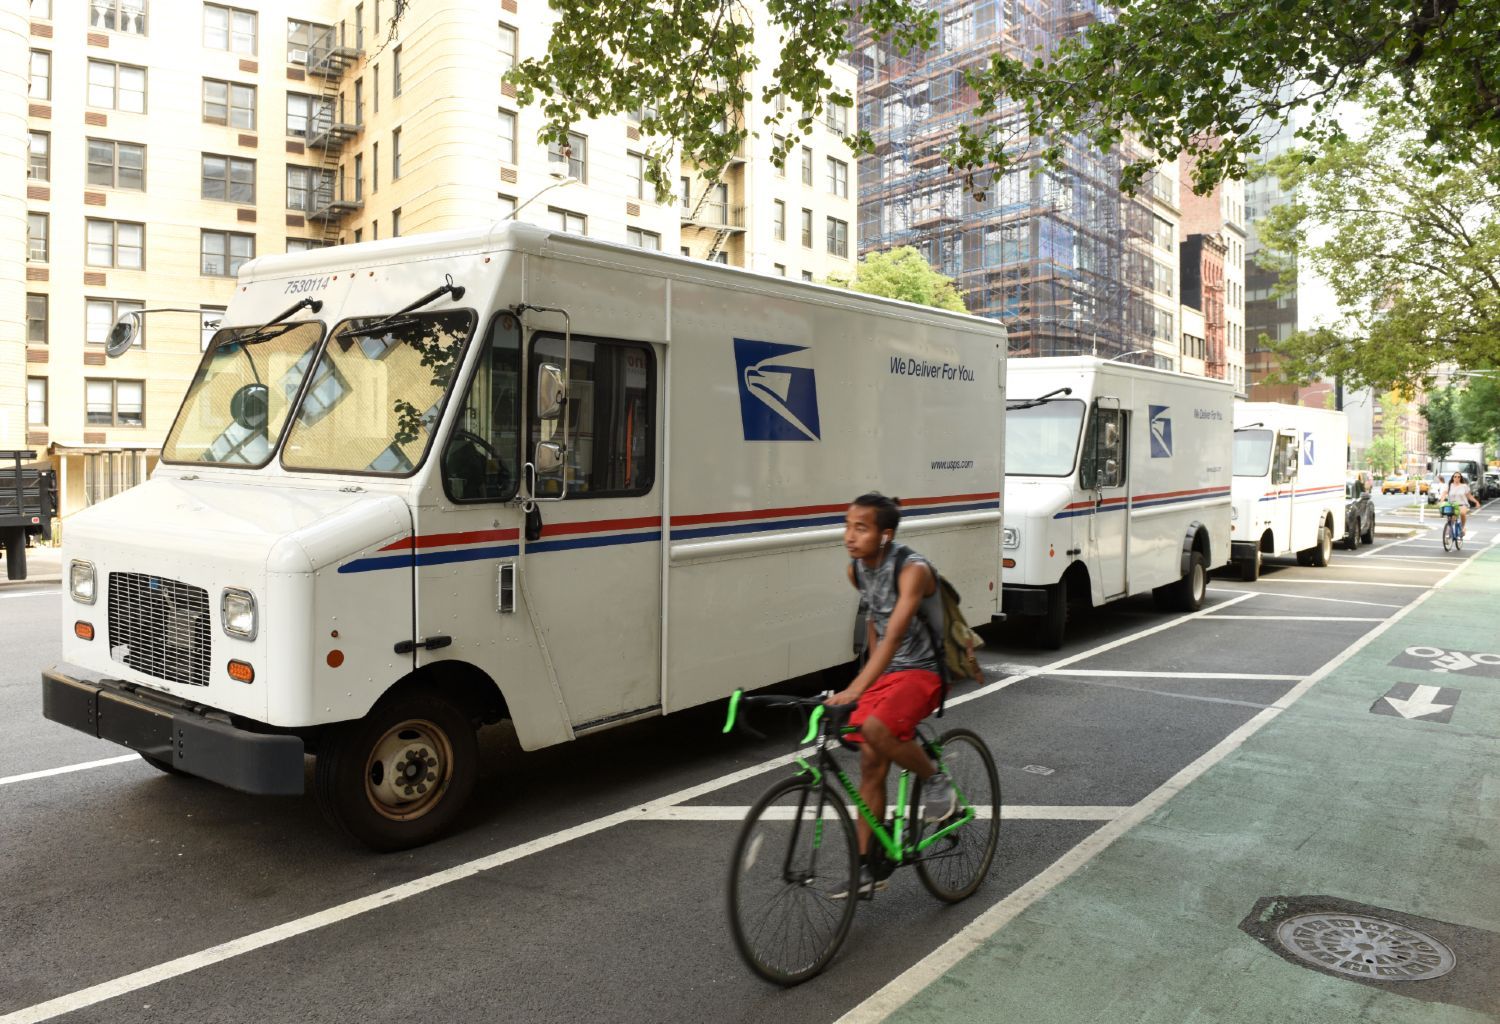 US Postal Service trucks on city street - Voting by mail ahead of Election Day